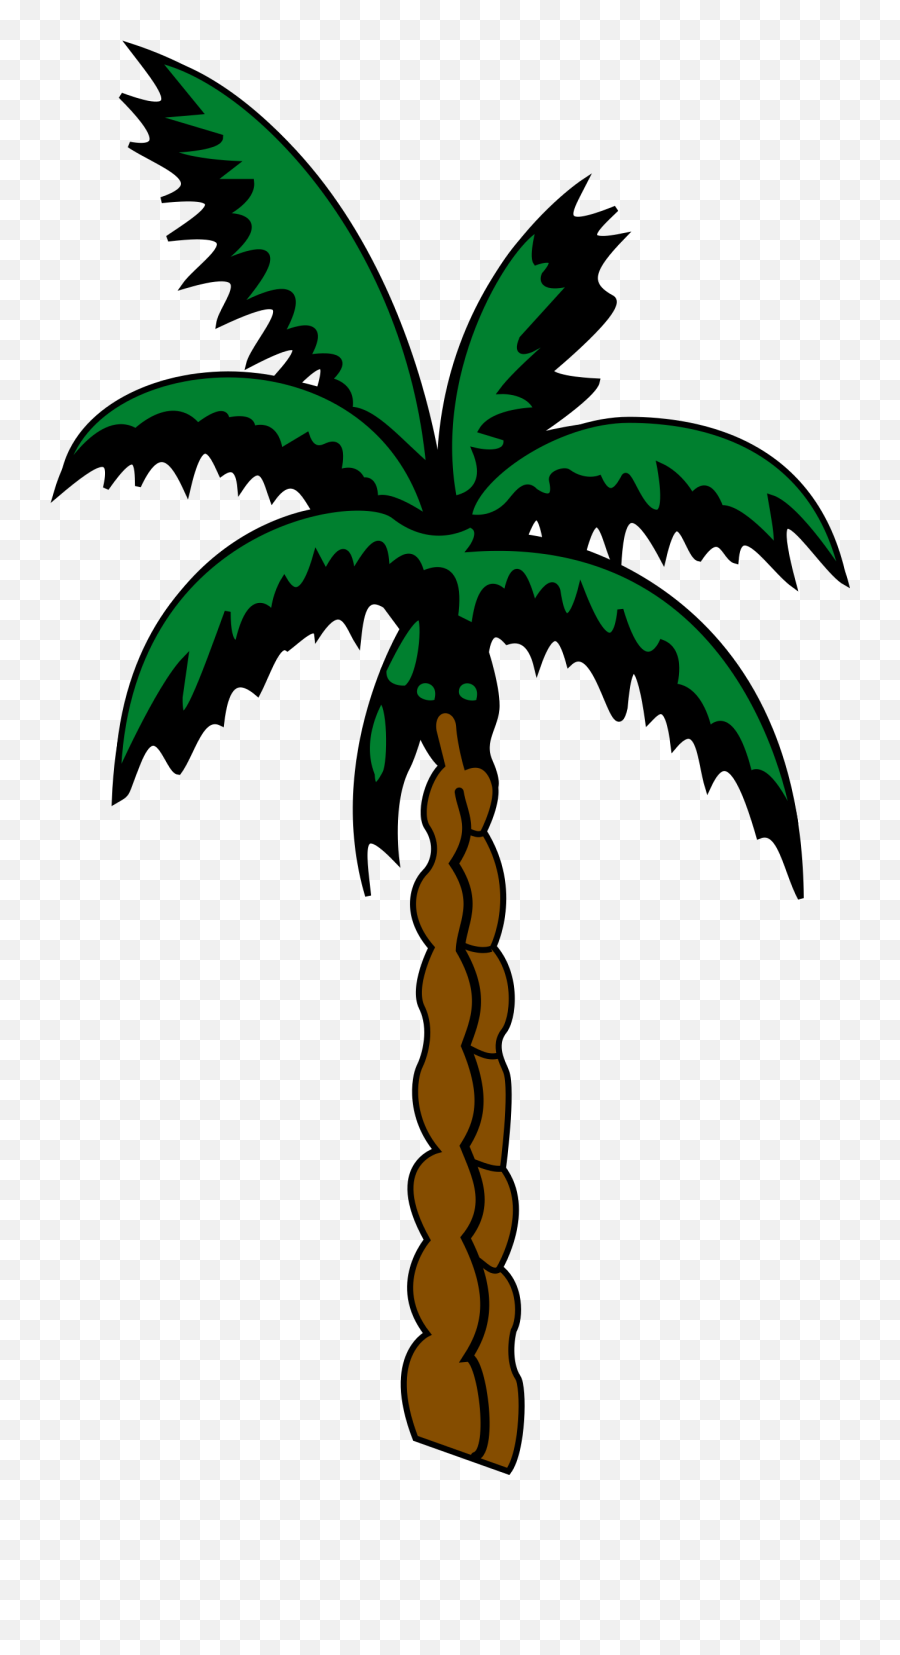 Free Icons Png Design Of Palm Tree - Suriname Coat Of Arms,Palmtree Png